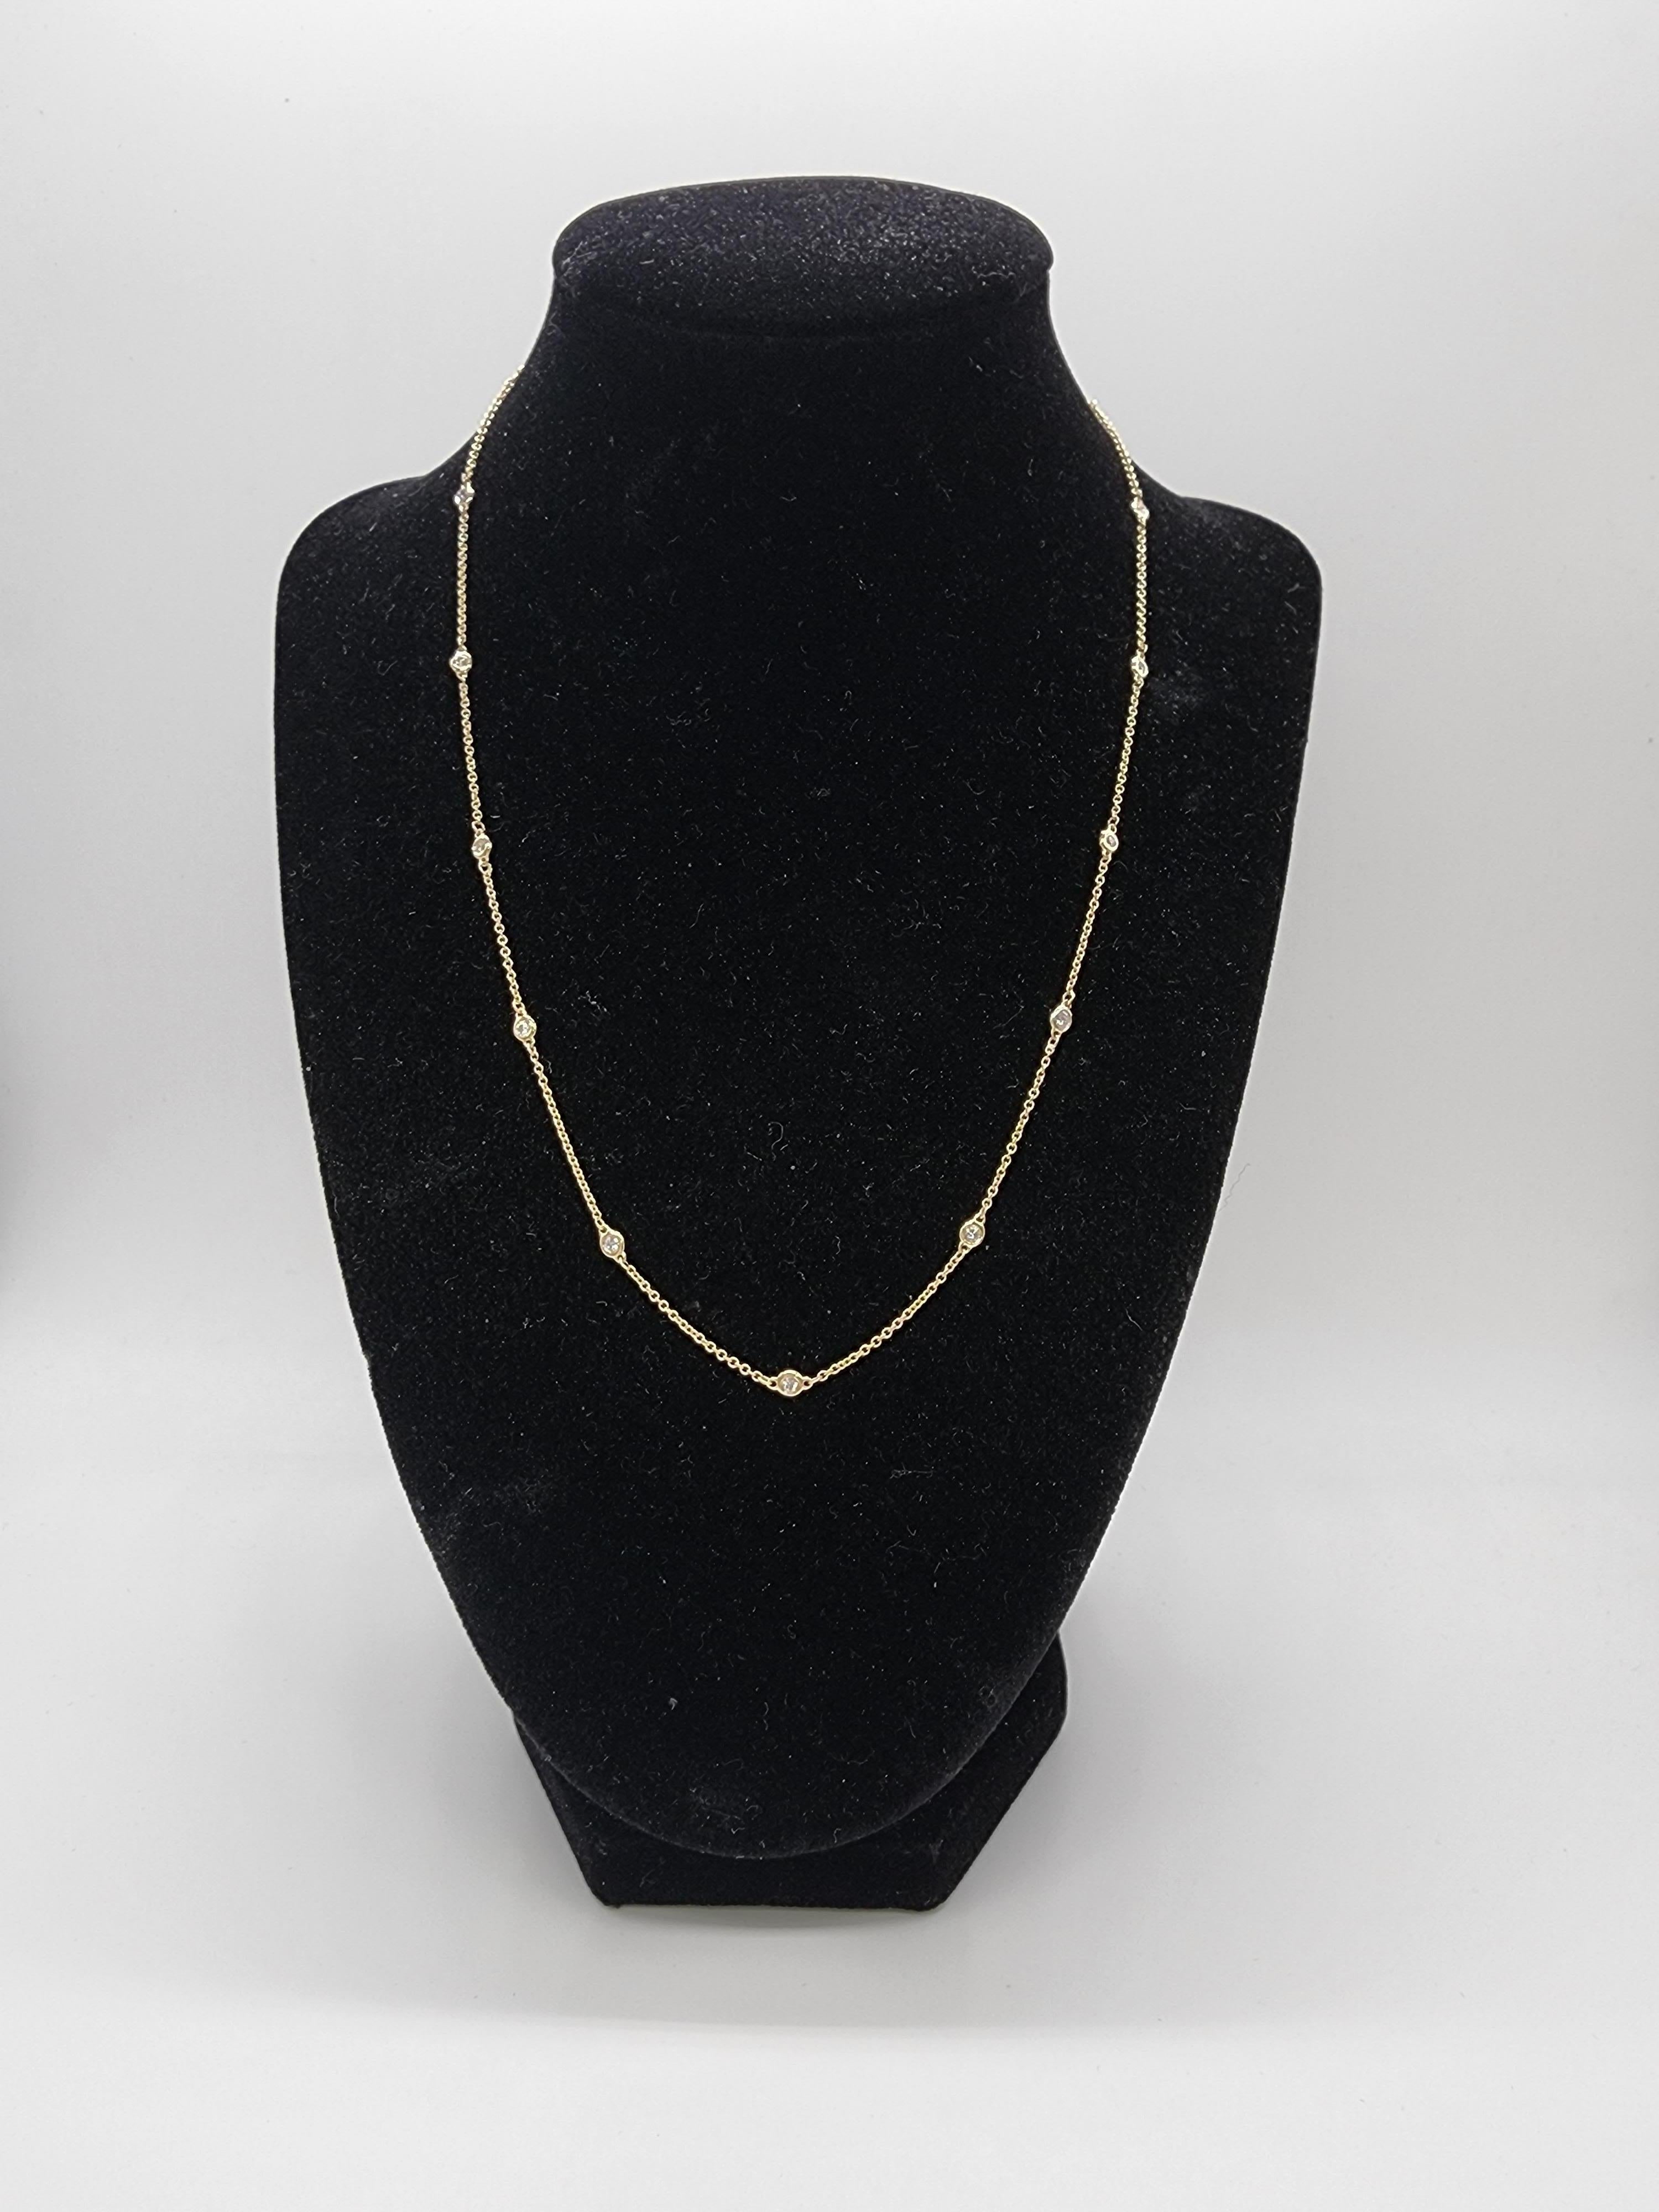 15 Station Diamond by the yard necklace set in Italian made 14K Yellow gold. The total weight is 0.45 carats. Beautiful shiny stones. The total length is 18 inch.